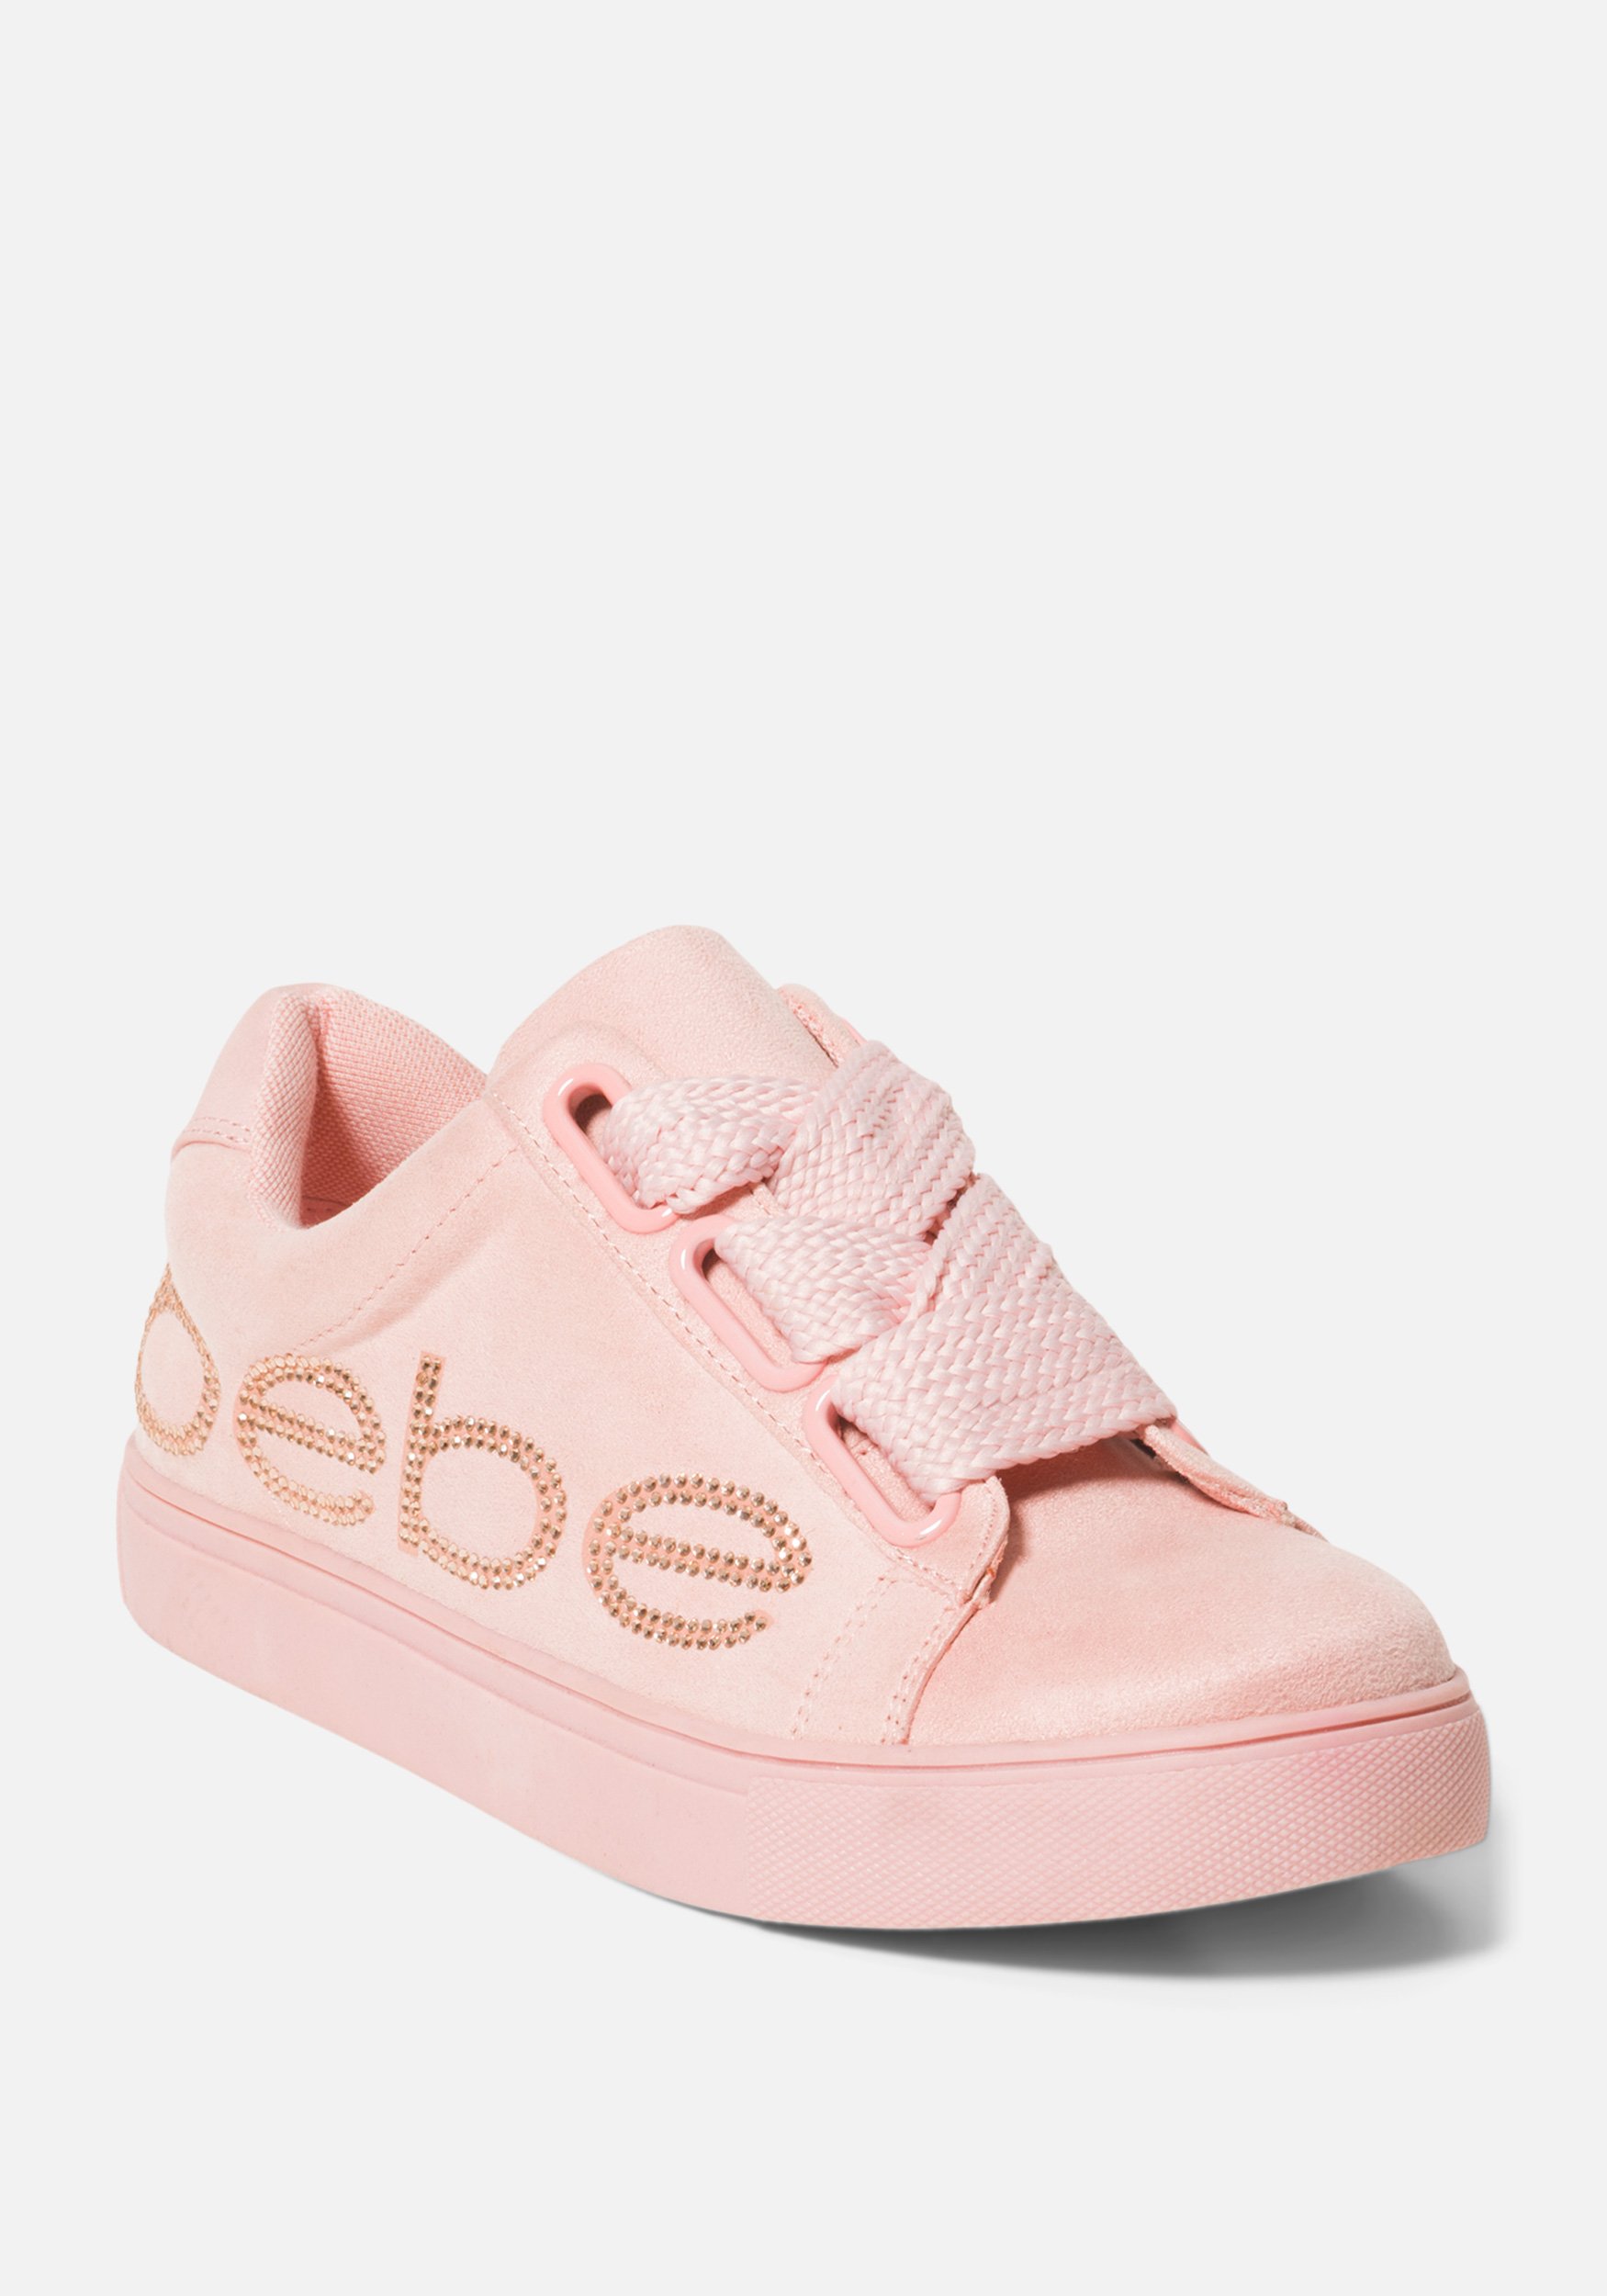 Women's Cabree Bebe Logo Sneakers, Size 8 in Pink Synthetic